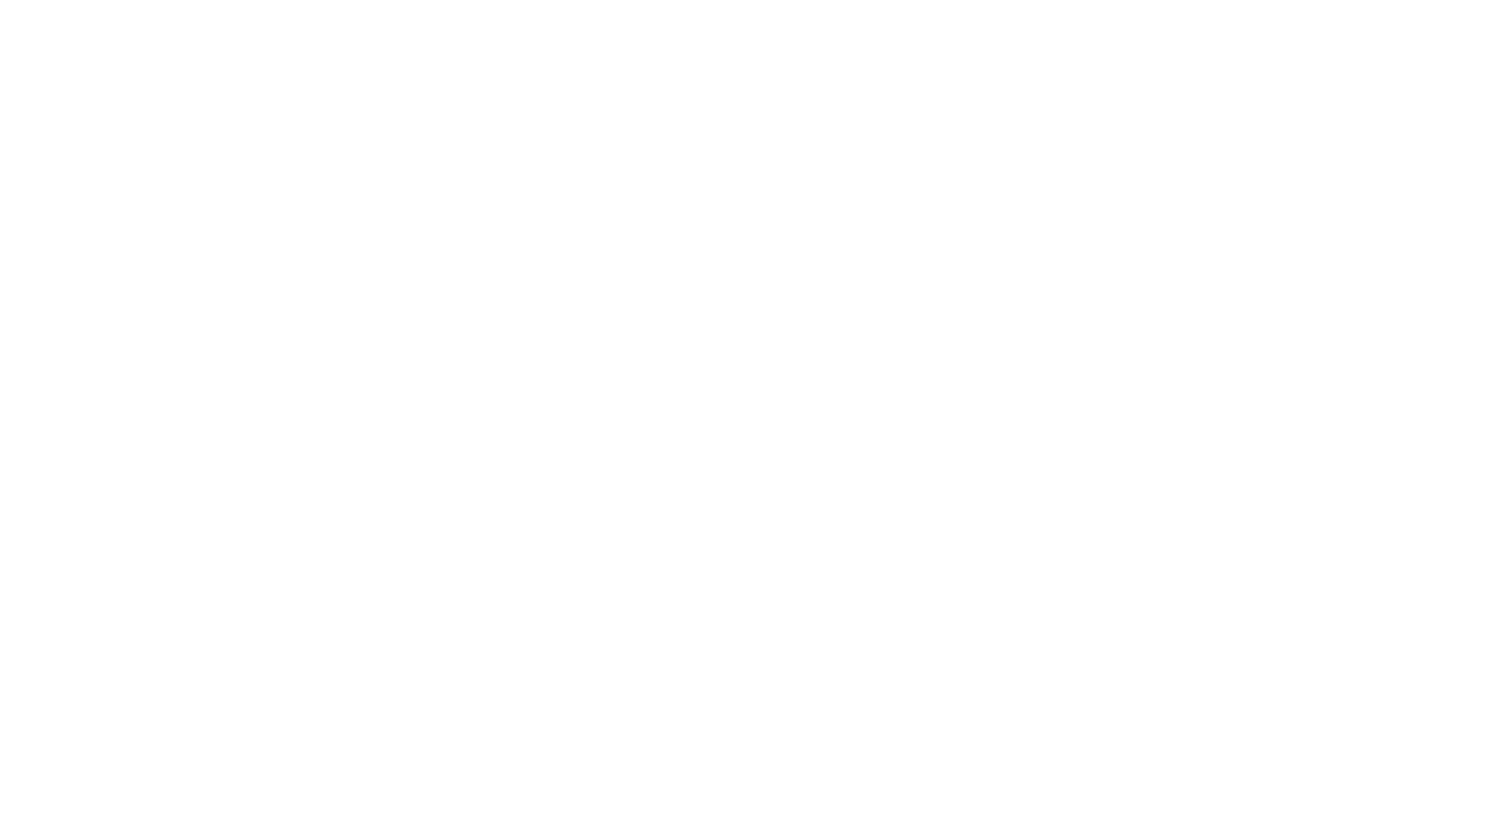 Safe and Sound Counseling and Consultation, LLC